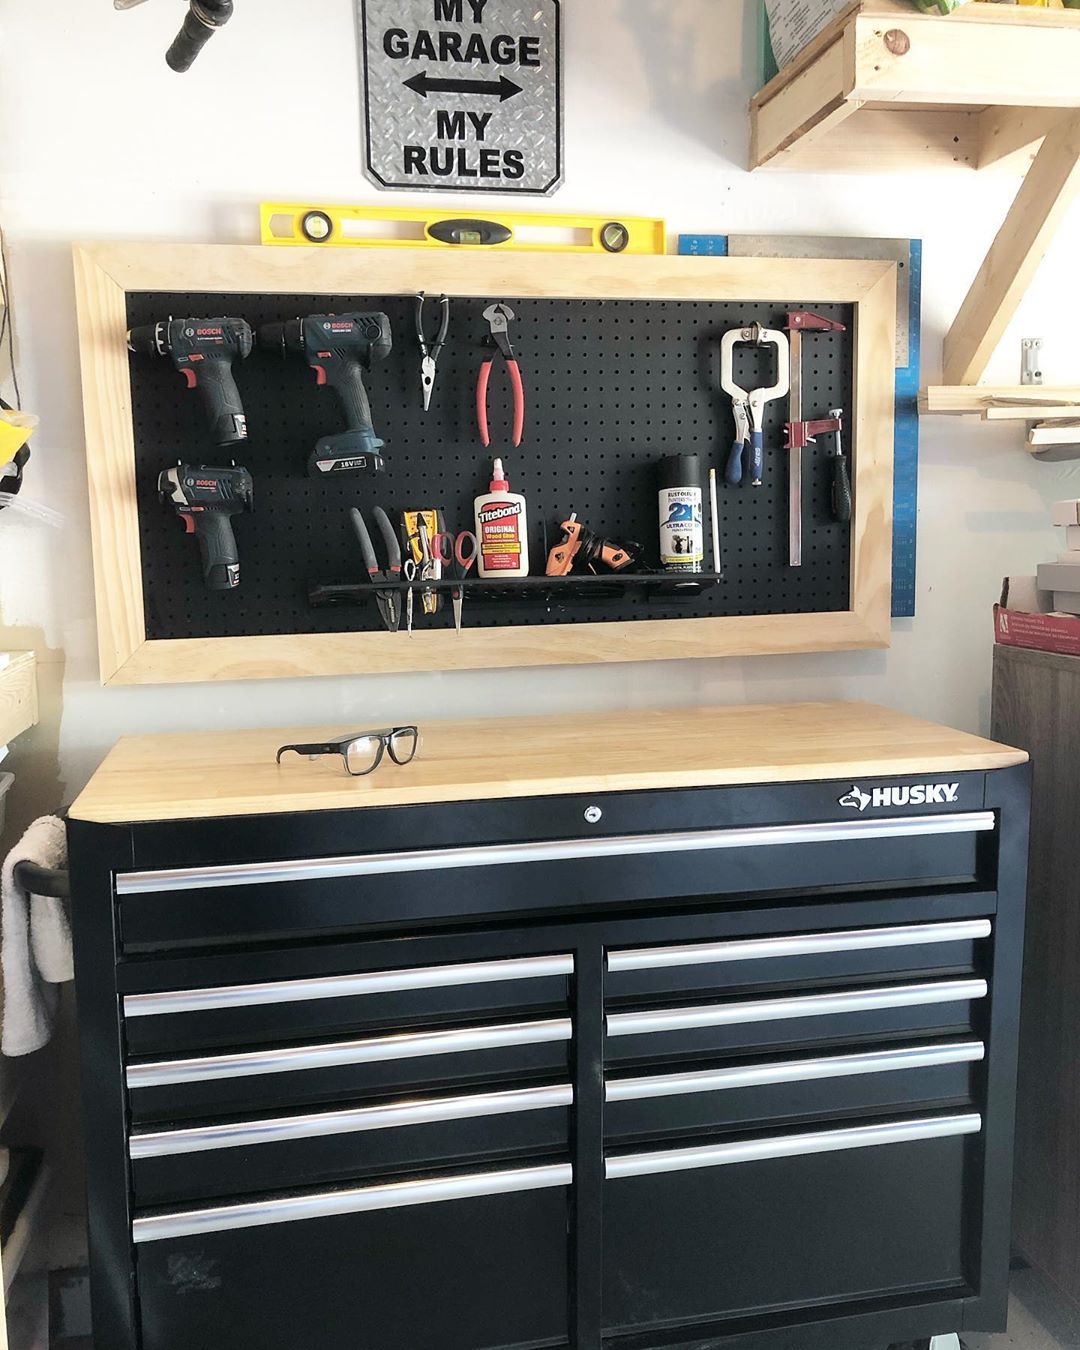 Pegboard with Saws, Hammers, and Tools in a Garage. Photo by Instagram user @daniraehome